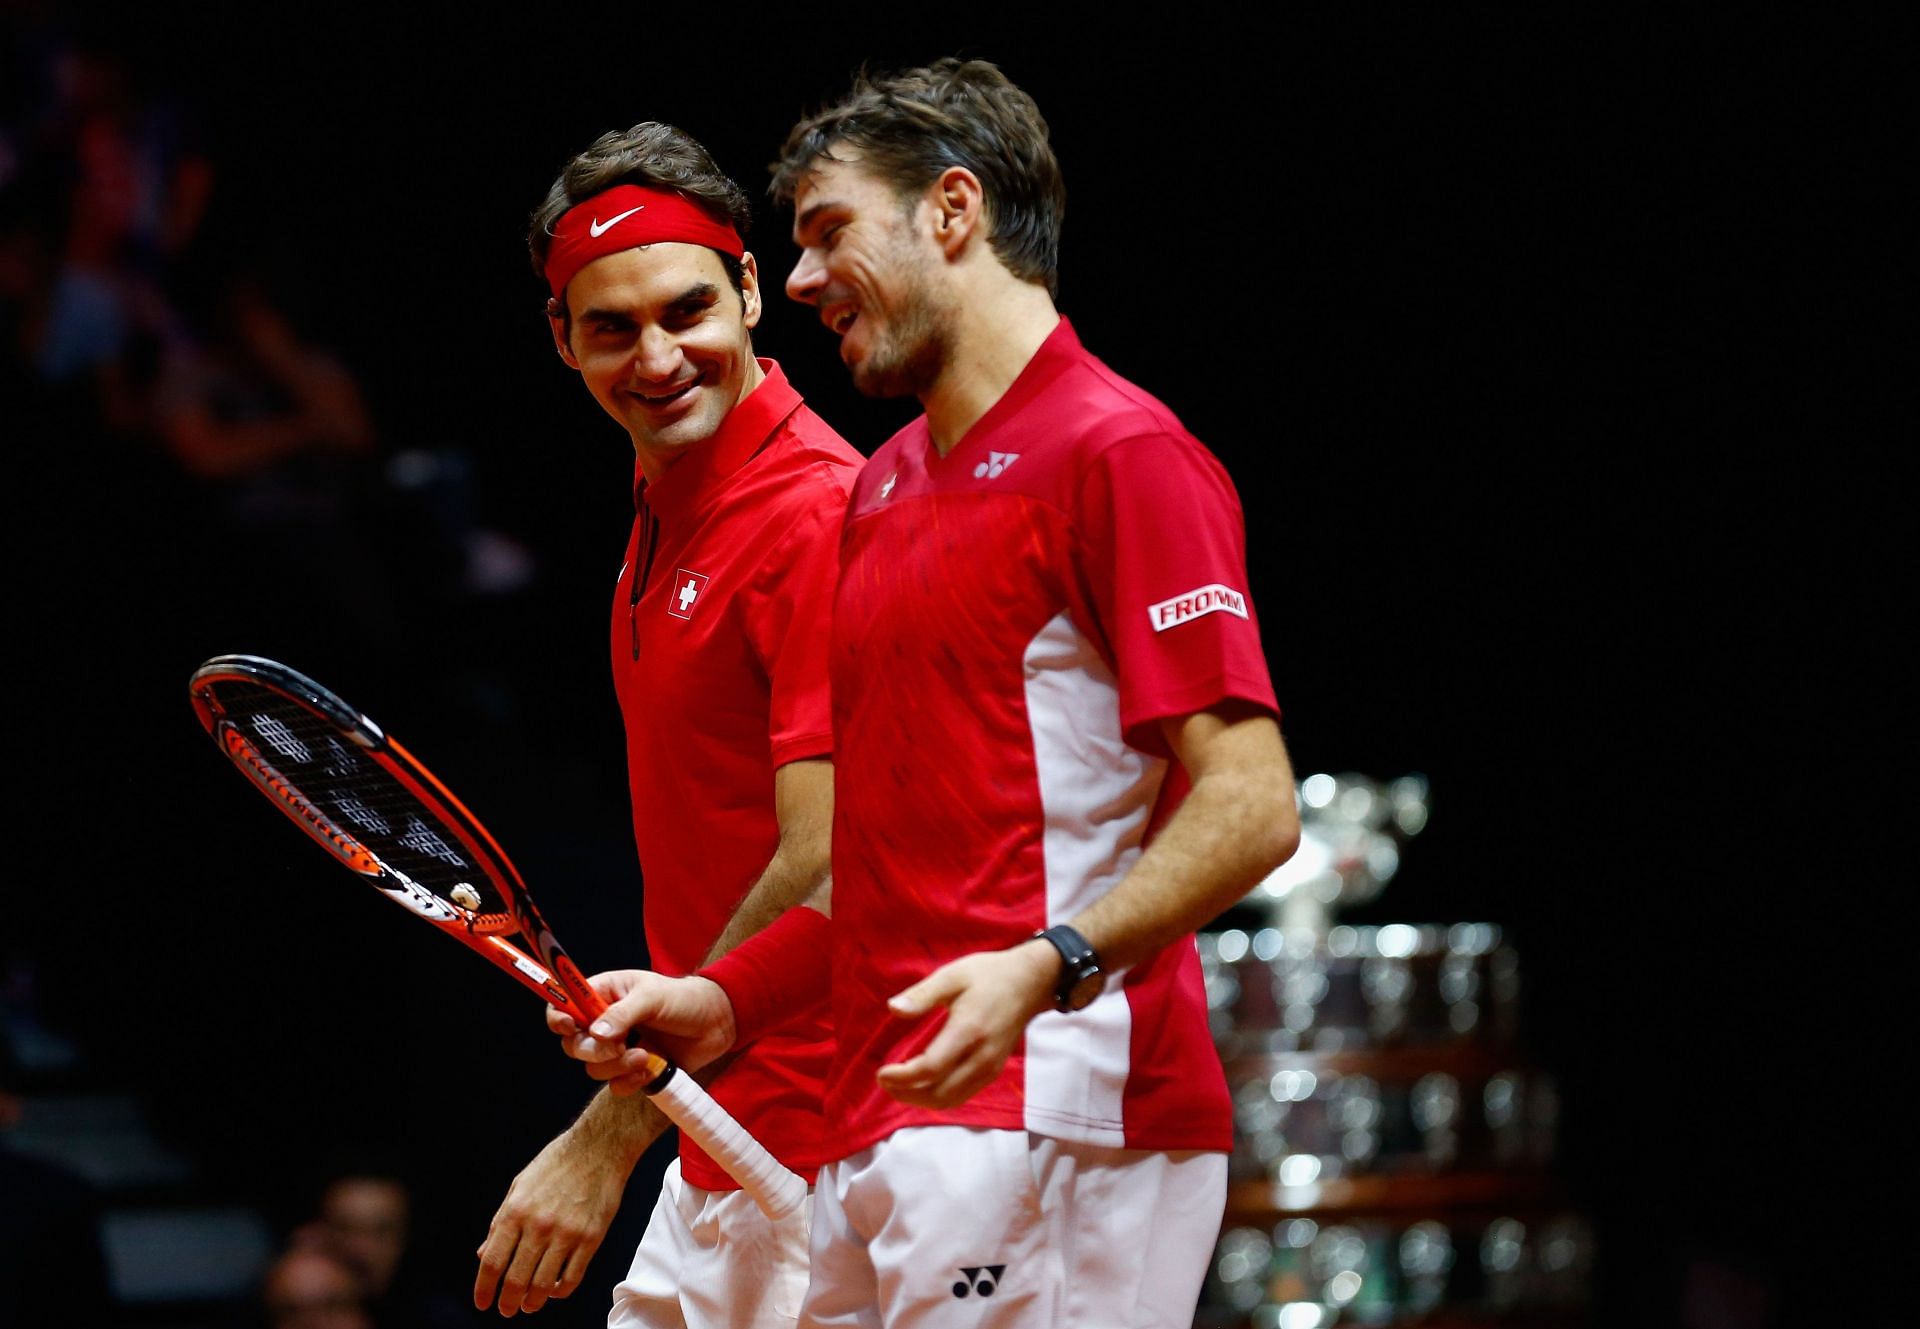 Roger Federer and Stan Wawrinka share a light moment during their doubles match at the Davis Cup Finals in 2014.